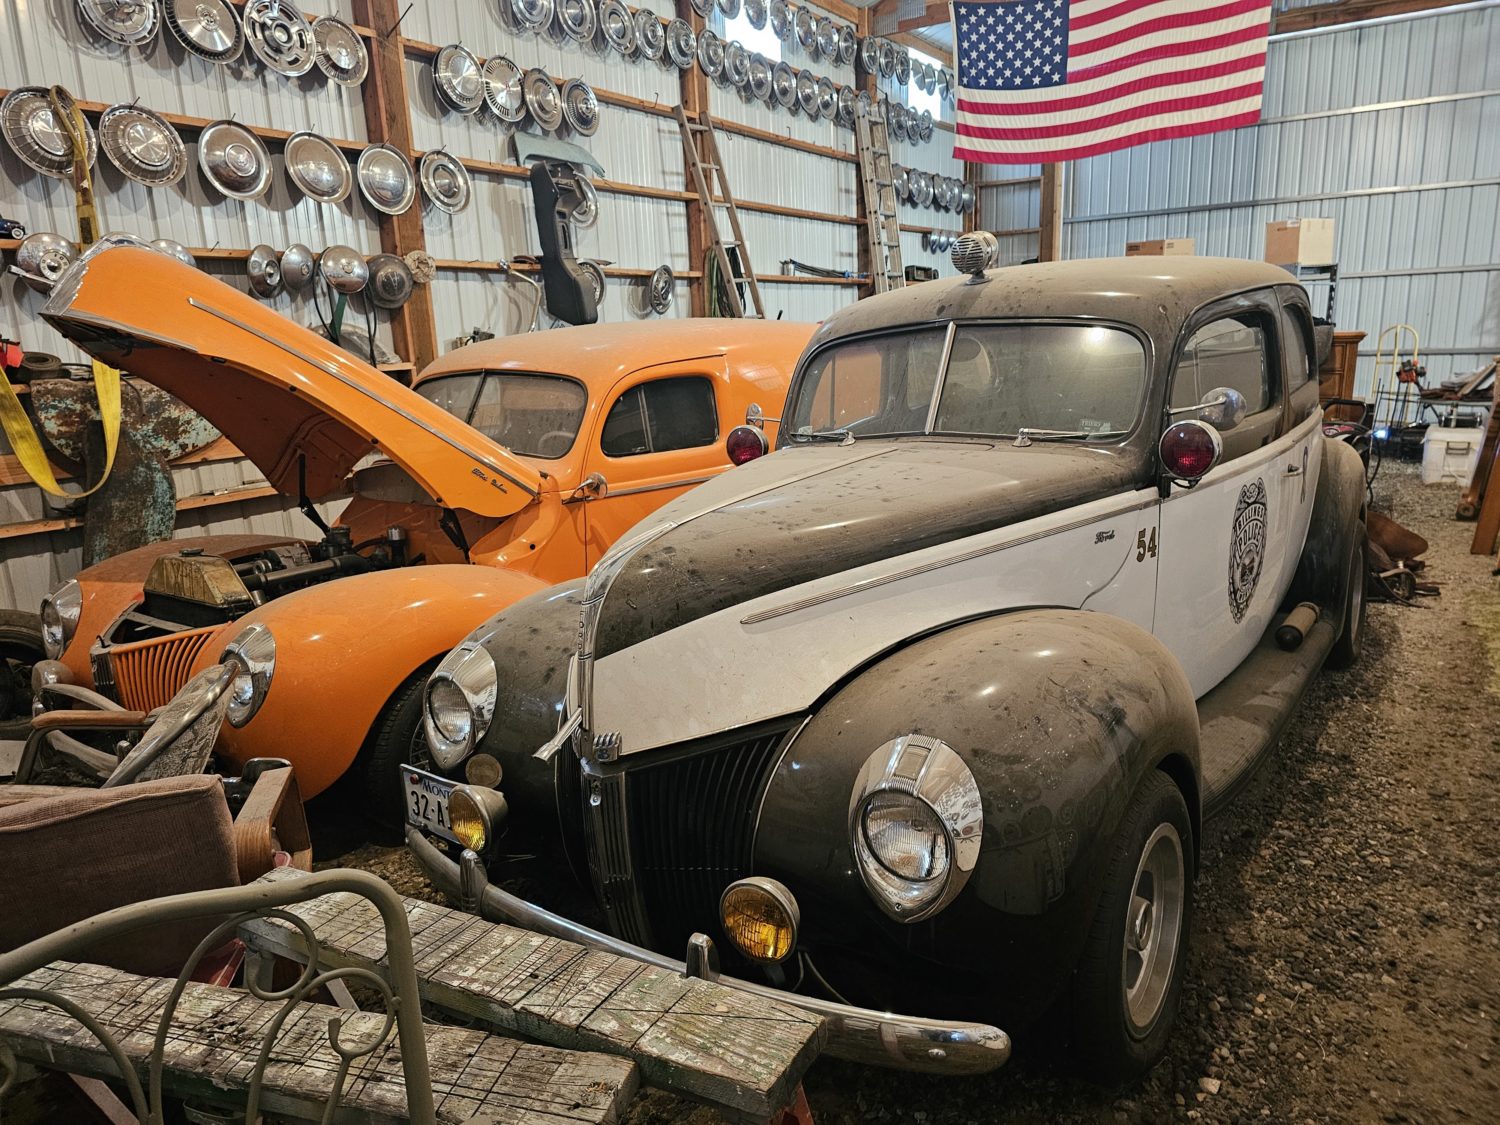 1940 Ford Cars, Parts & More! The Willie Shields Collection! Live Onsite-With Online Bidding - image 1